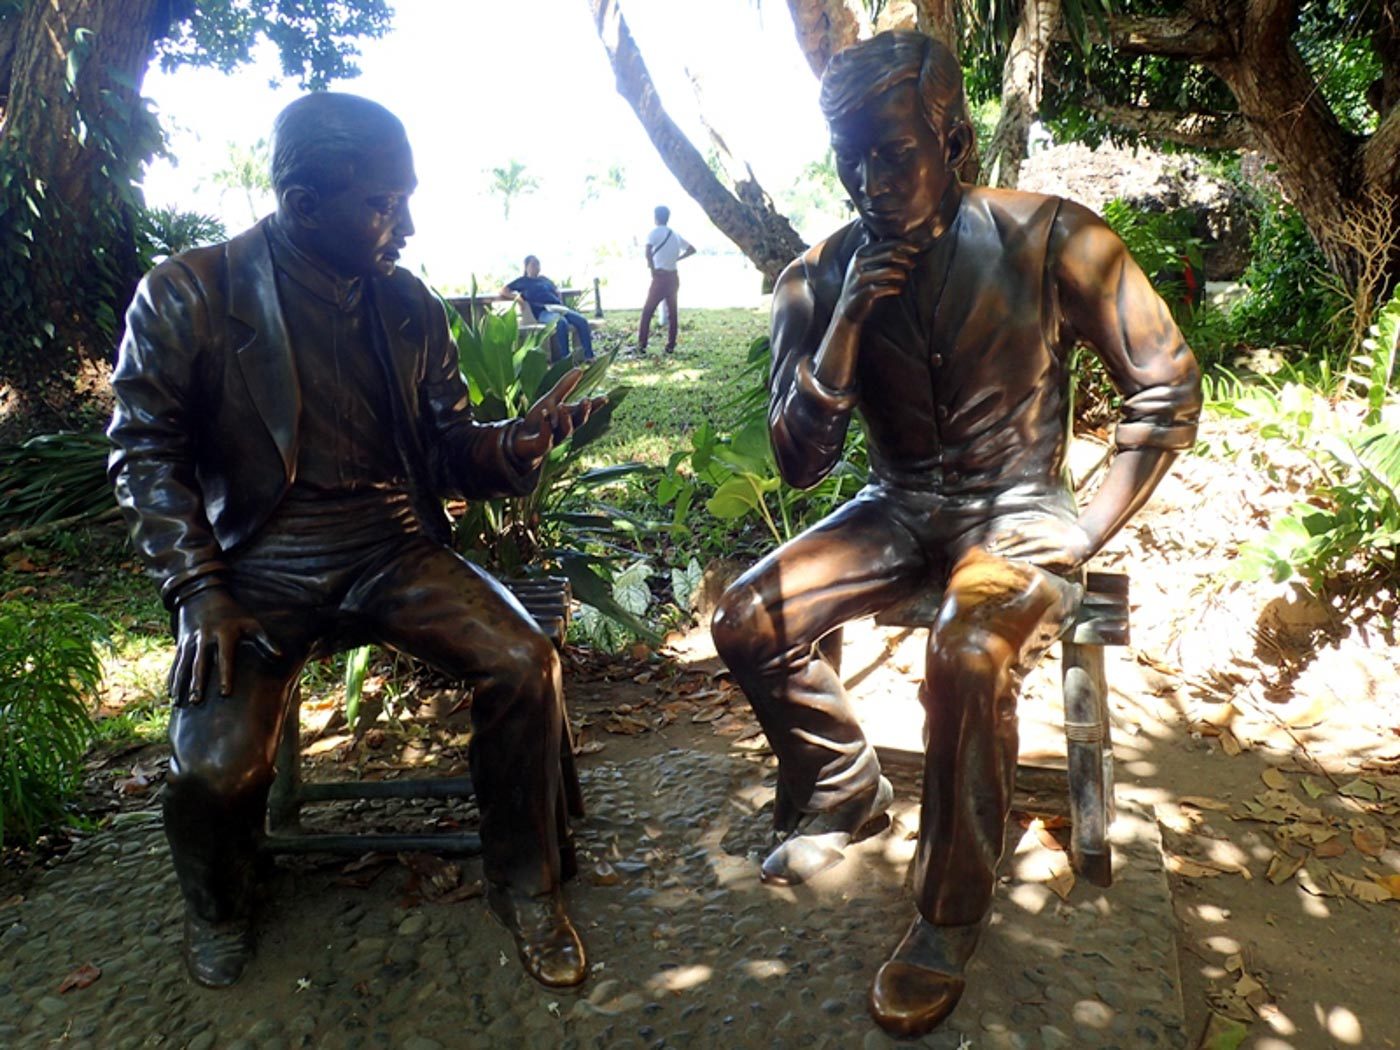 HISTORIC CONVERSATION. This is the estimated spot where Katipunan member Pio Valenzuela shared the group's plans for armed revolution, and where Rizal advised them to proceed only upon securing enough arms and support from wealthy sponsors. 